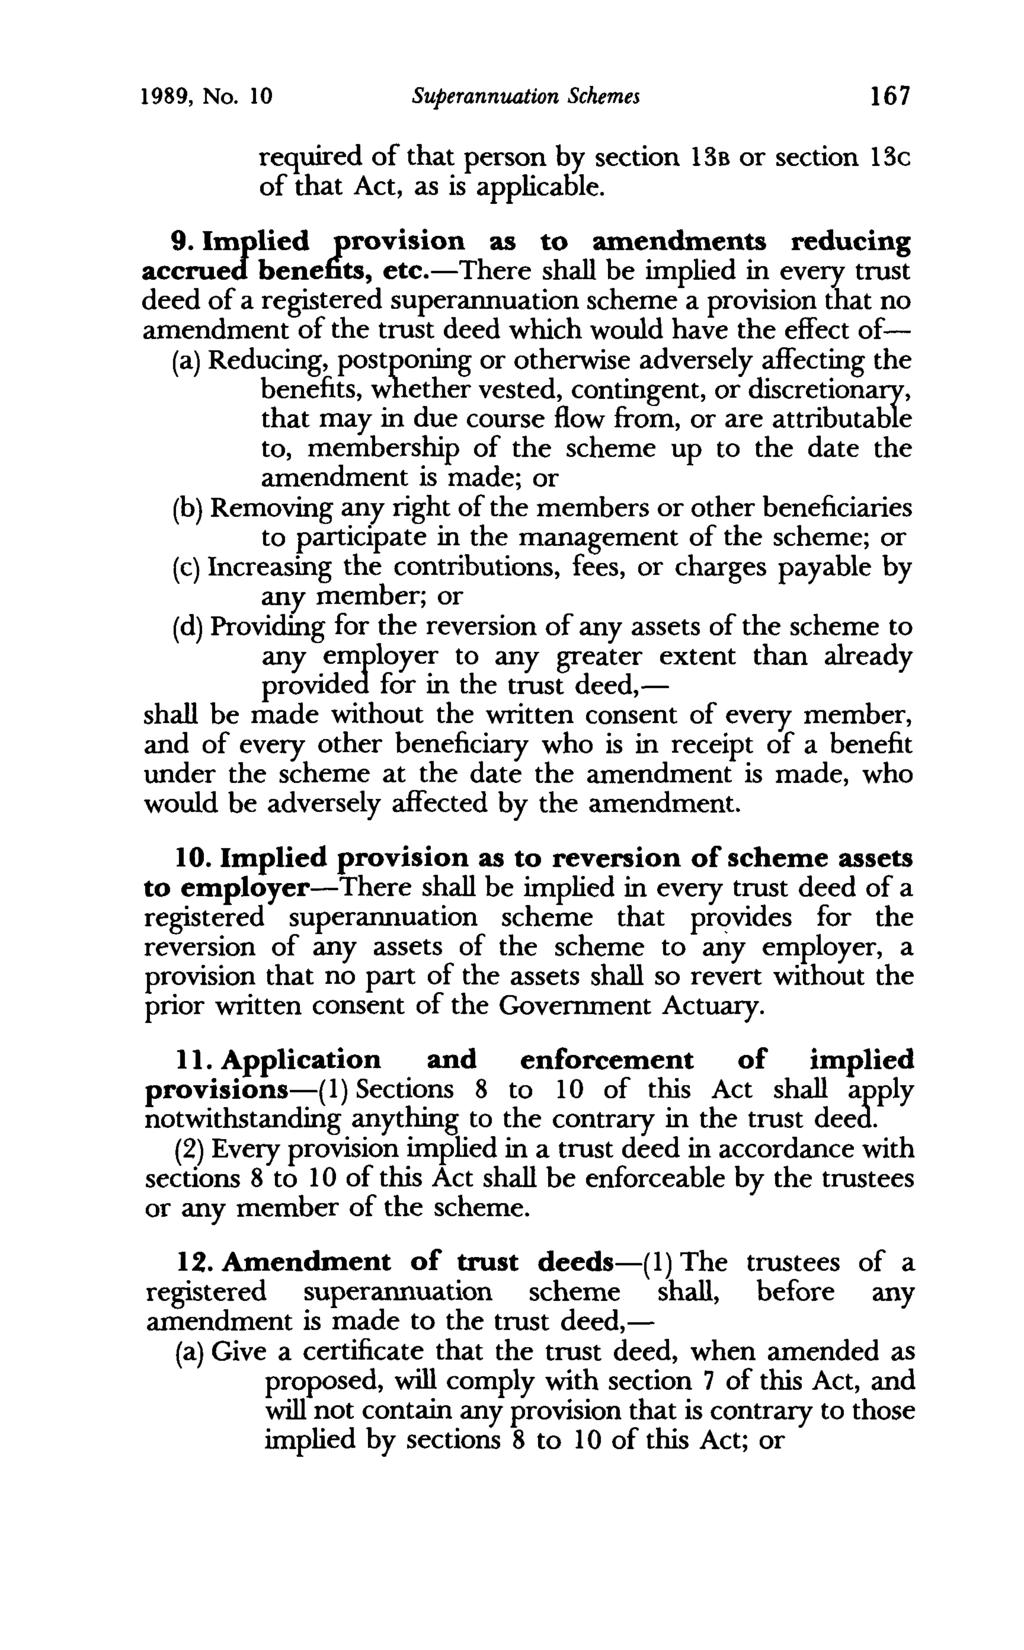 1989, No. 10 Superannuation Schemes 167 required of that person by section 136 or section 13c of that Act, as is applicable. 9. Implied provision as to amendments reducing accrued benefits, etc.